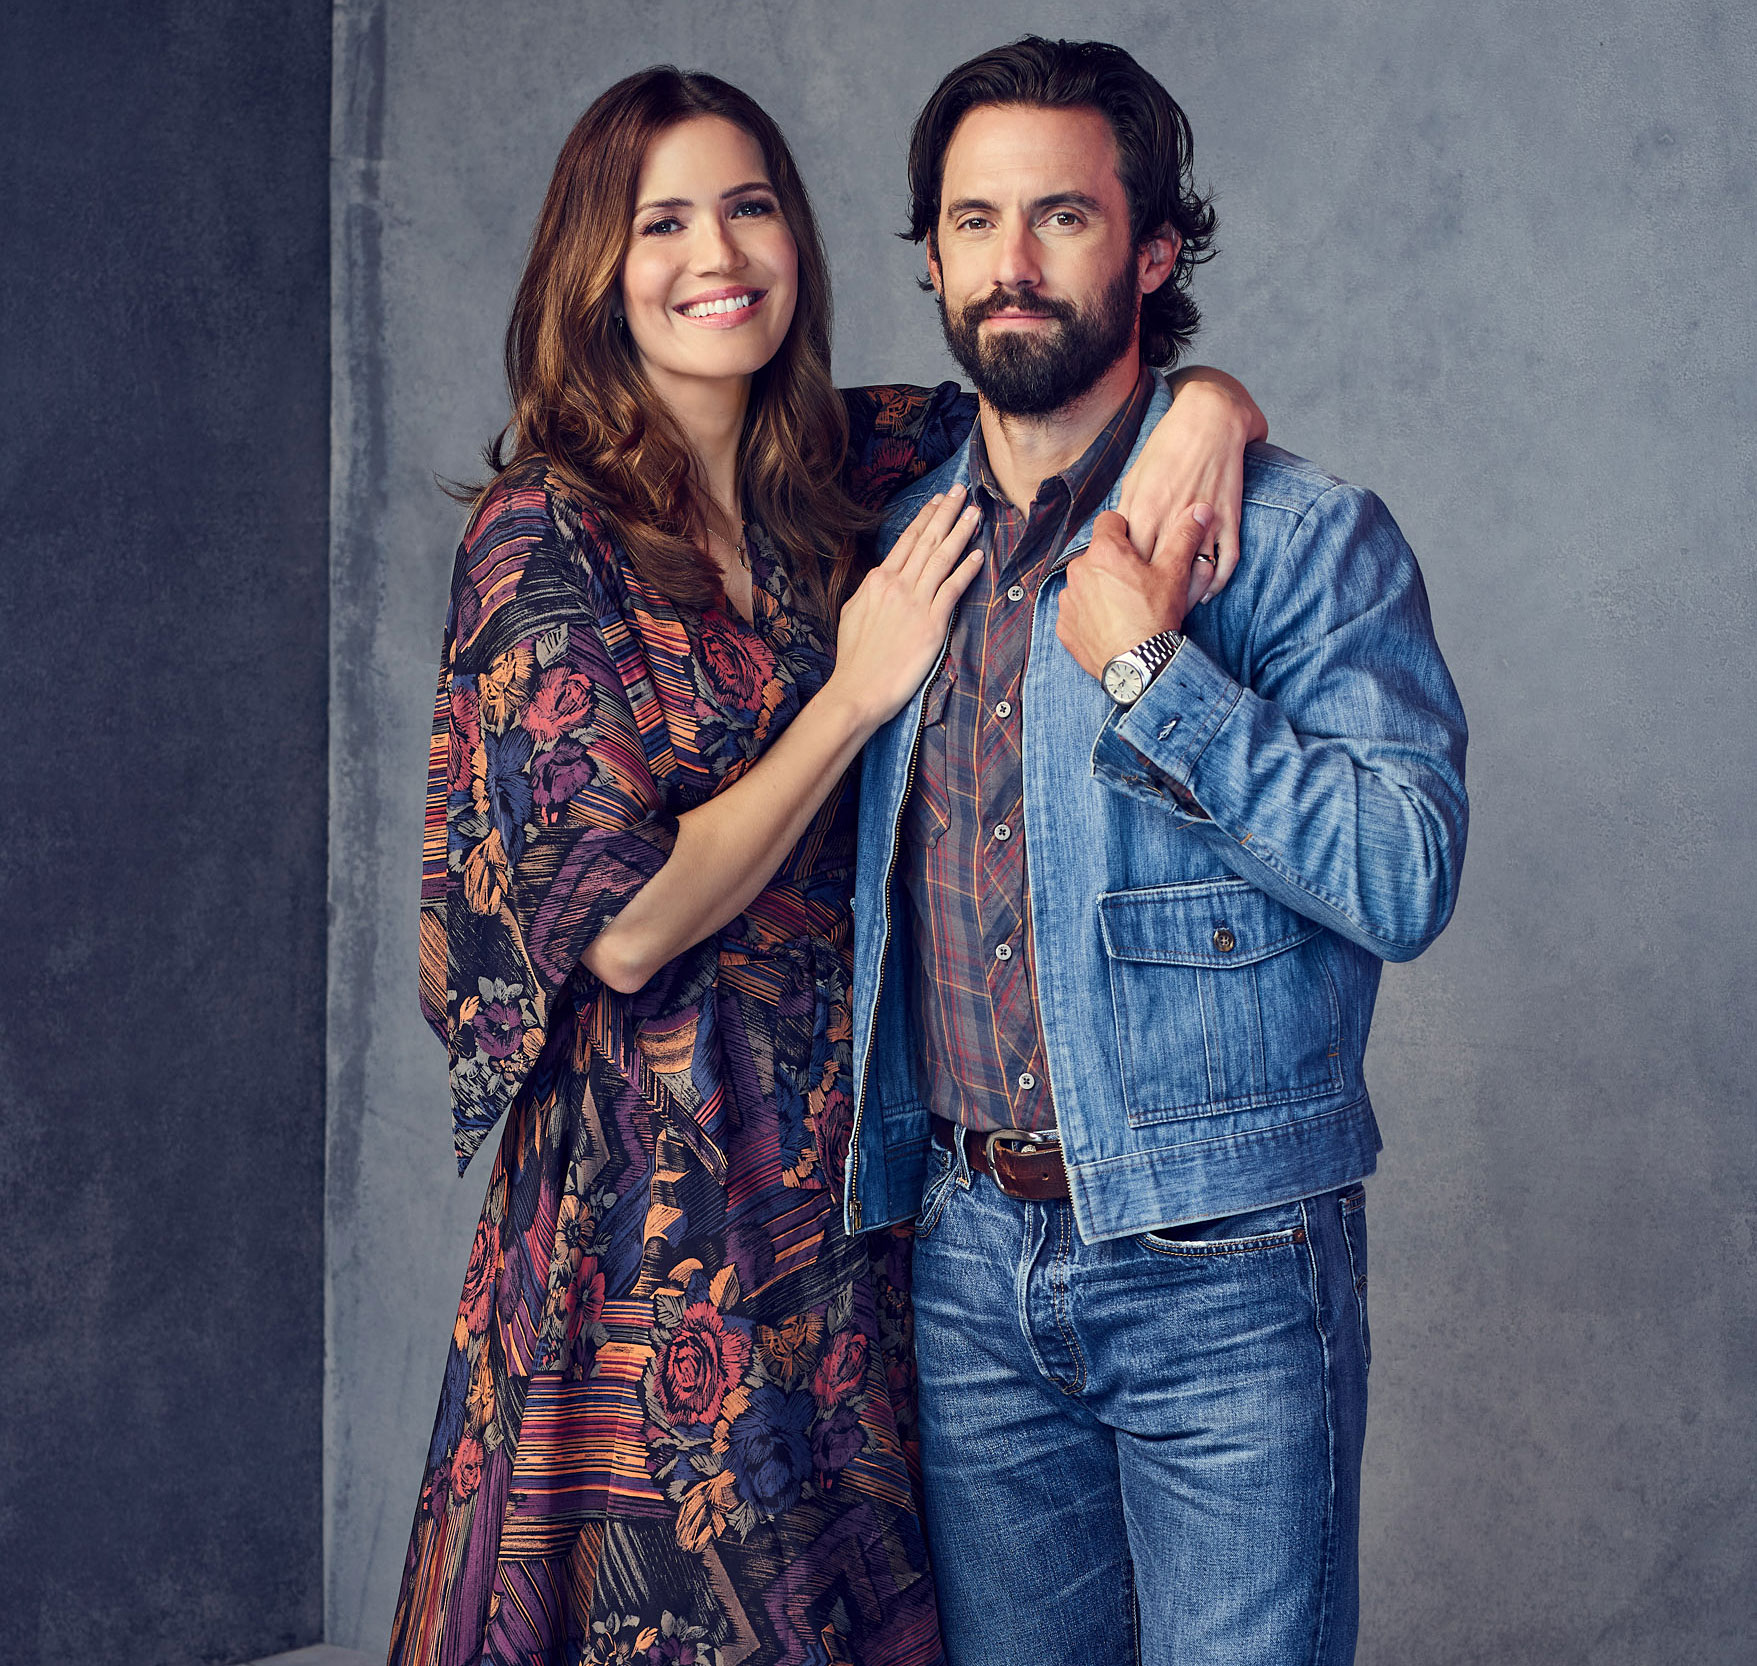 This Is Us': Jack and Rebecca's Full Relationship Timeline